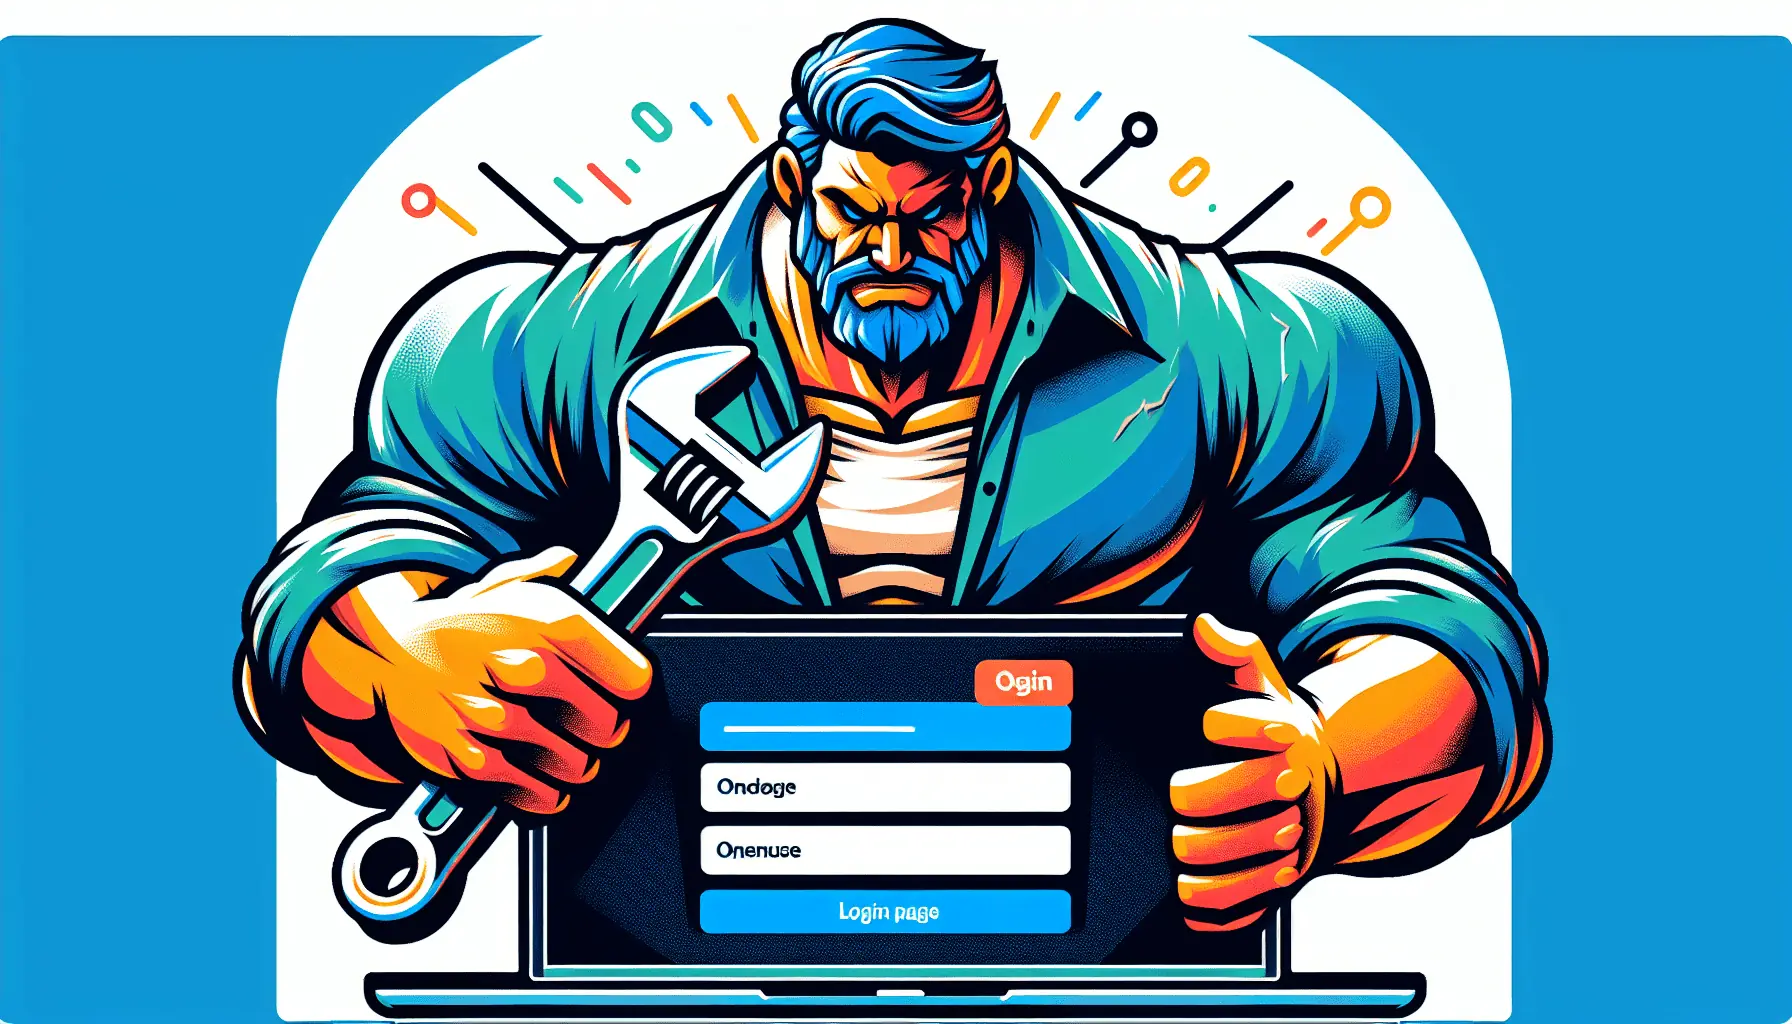 A photo of a titan wearing a blue collar and holding a wrench, looking at a laptop screen that shows the ServiceTitan login page.